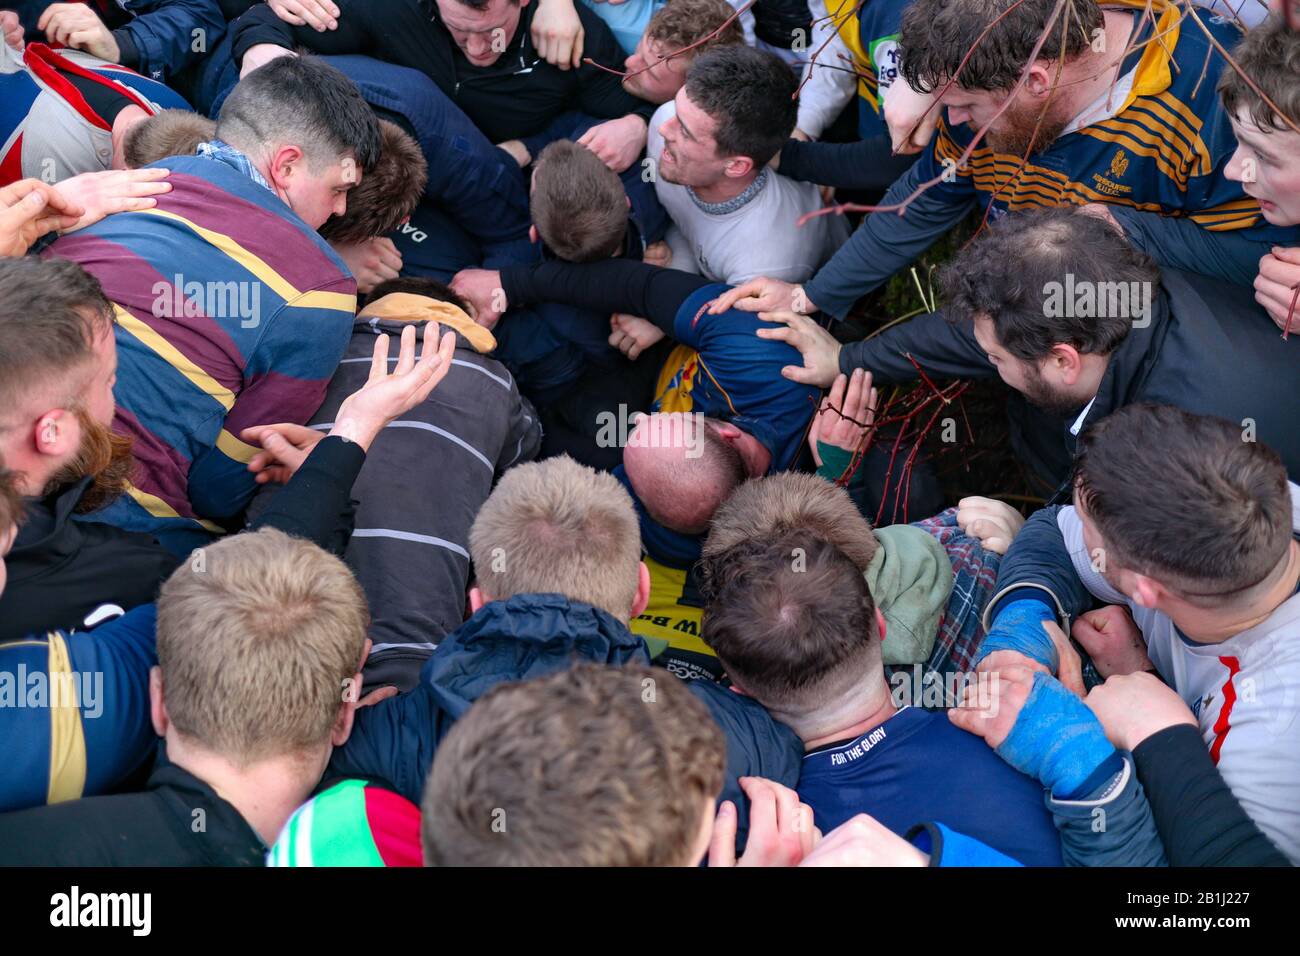 Ashbourne, UK. 25th Feb, 2020. The first day of the two day Shrovetide Football Game in the market town of Ashbourne, Derbyshire. The game is played with two teams, the Up'Ards and the Down'Ards. There are two goal posts 3 miles (4.8 km) apart, one at Sturston Mill (where the Up'Ards attempt to score), other at Clifton Mill (where the Down'Ards score). Penelope Barritt/Alamy Live News Stock Photo